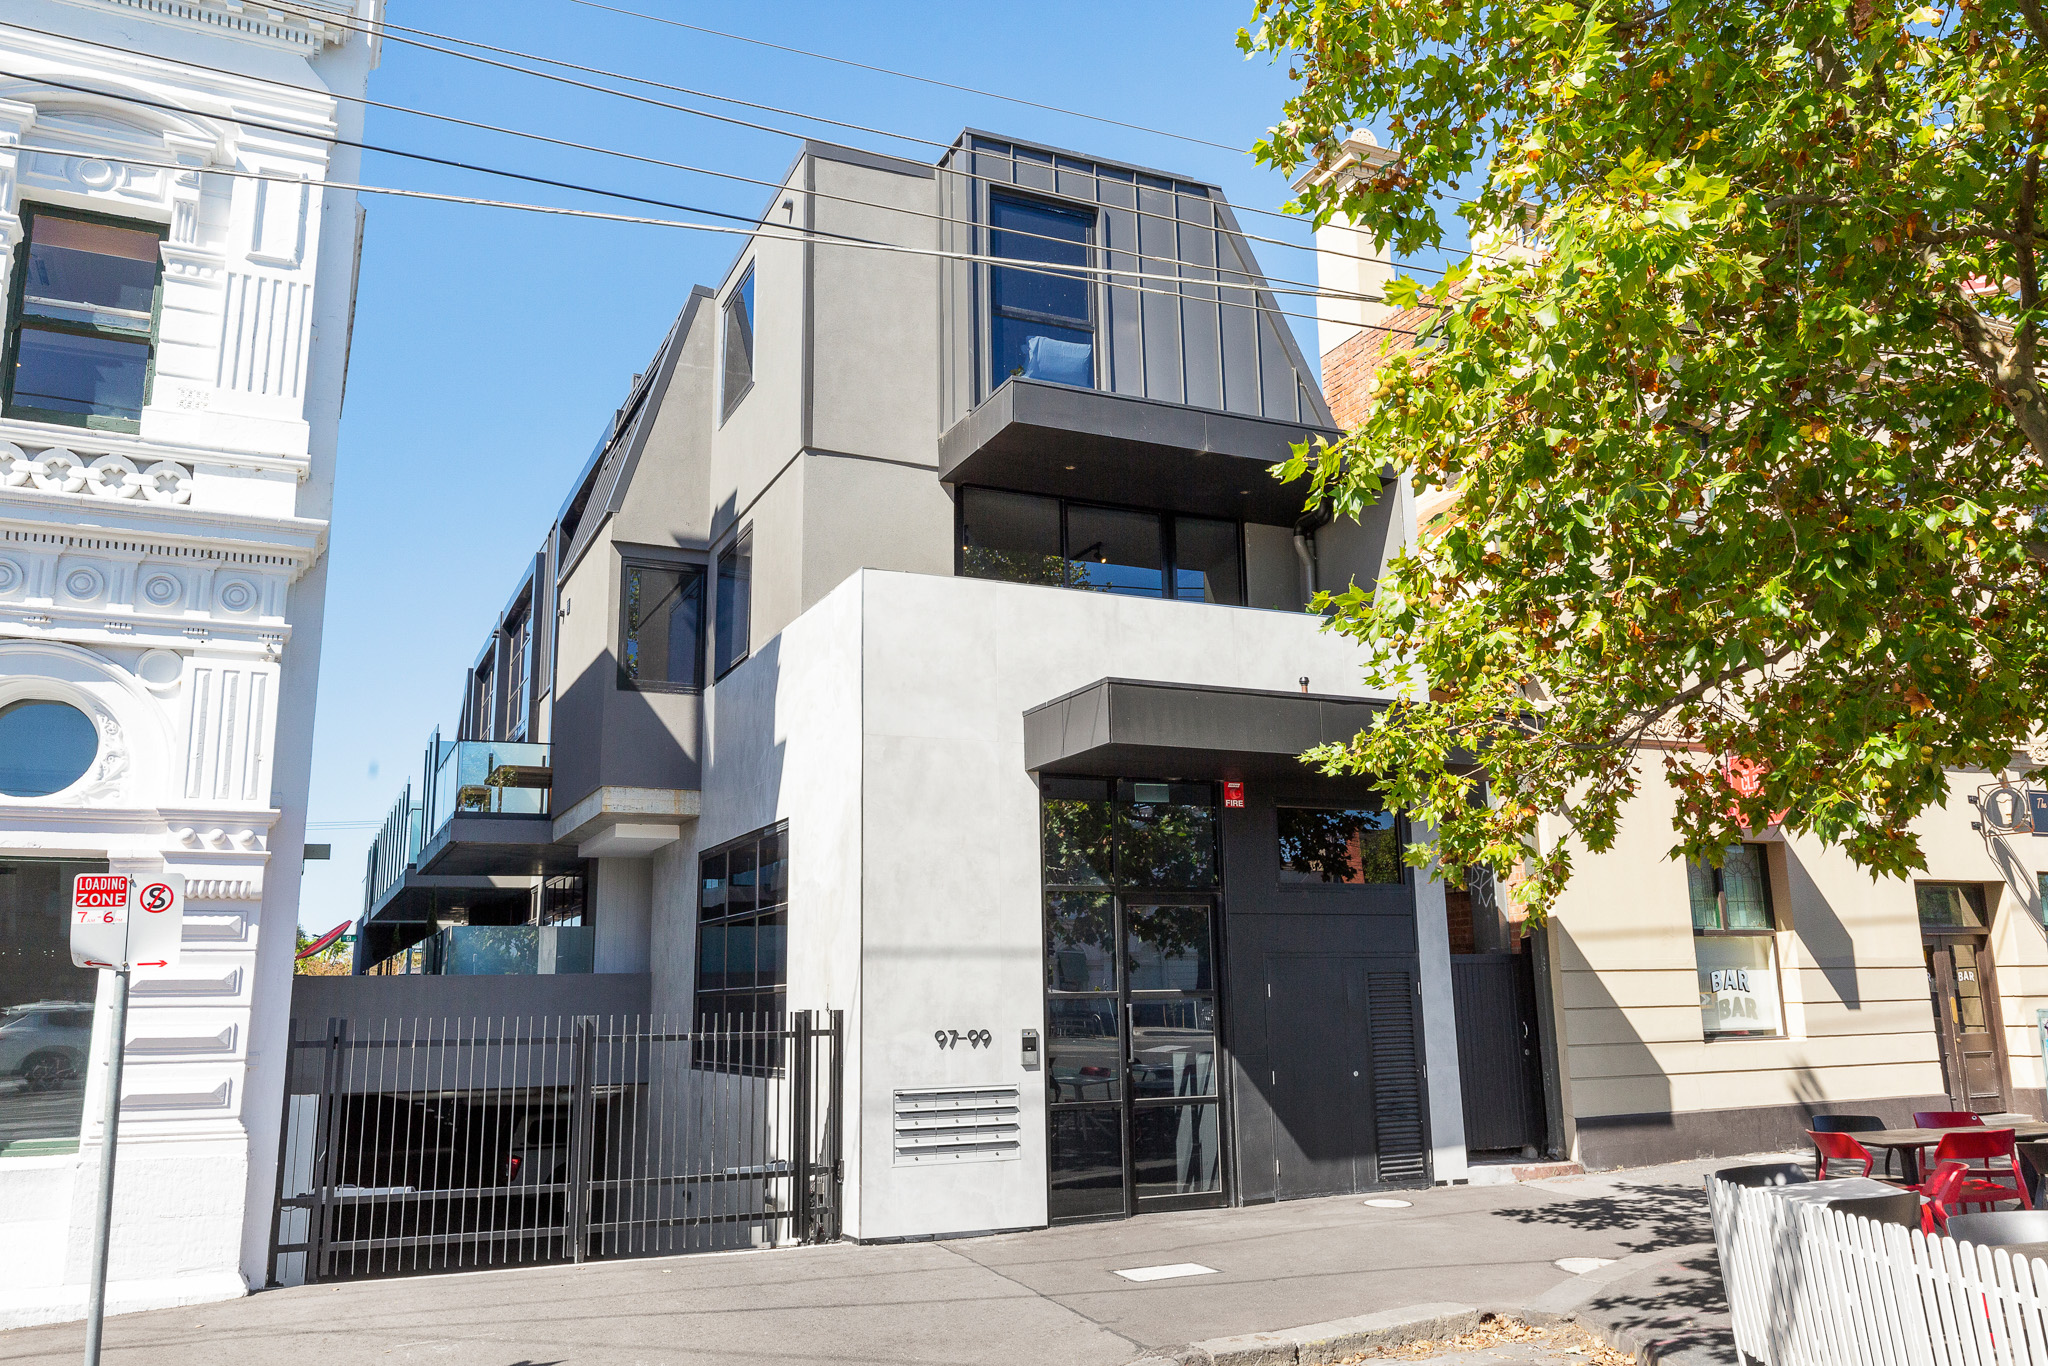 Exterior - Two Bedroom Townhouse - Urban Rest Fitzroy North - Melbourne